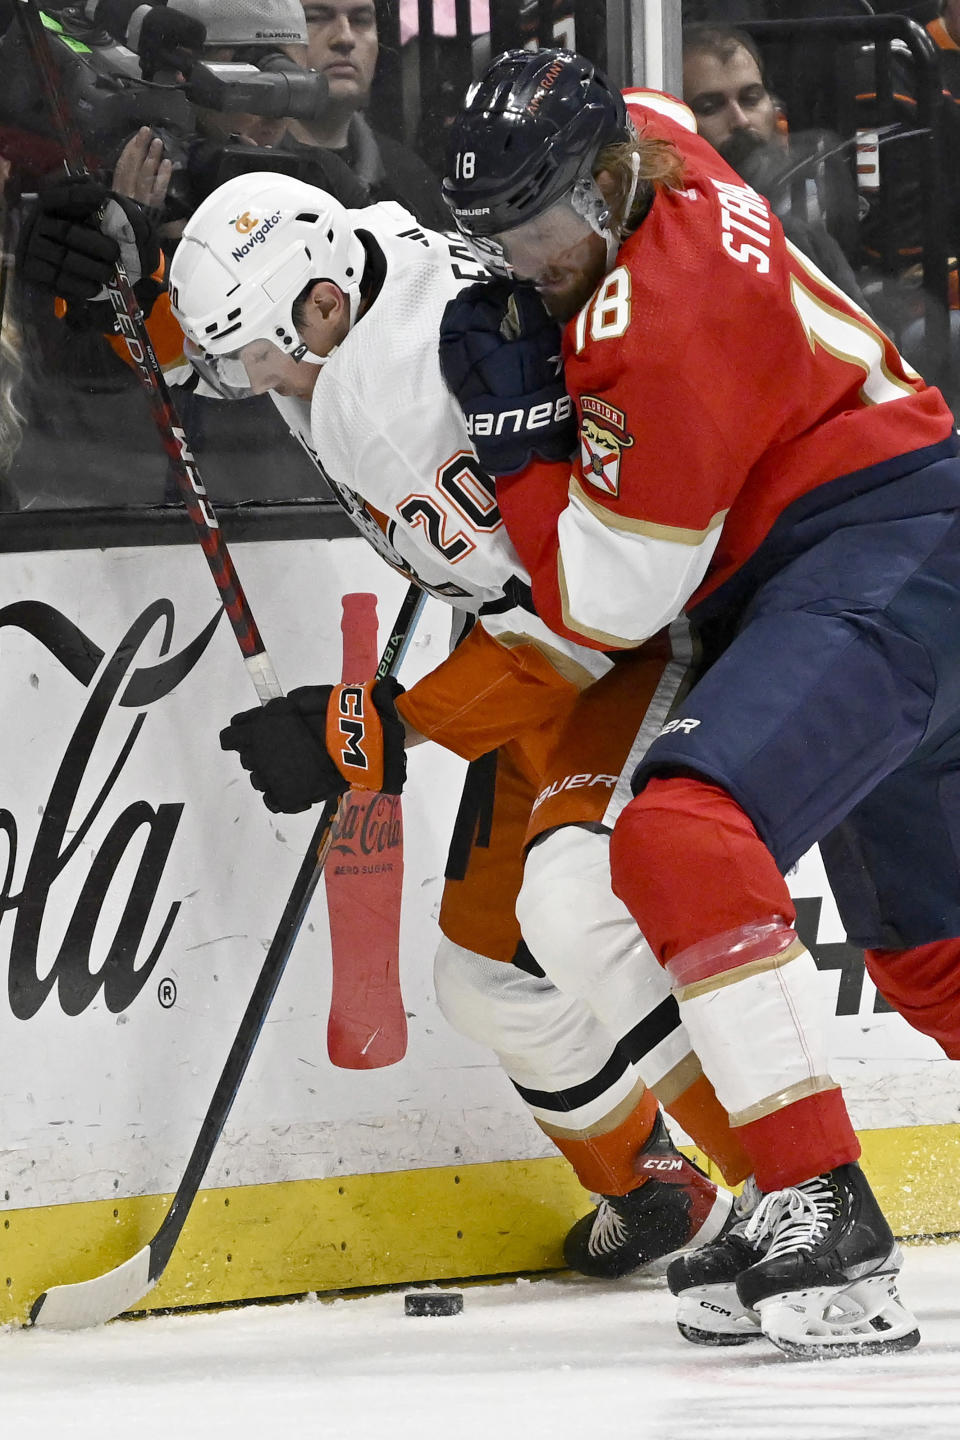 Anaheim Ducks right wing Brett Leason, left, vies for the puck with Florida Panthers defenseman Marc Staal during the first period of an NHL hockey game in Anaheim, Calif., Sunday, Nov. 6, 2022. (AP Photo/Alex Gallardo)